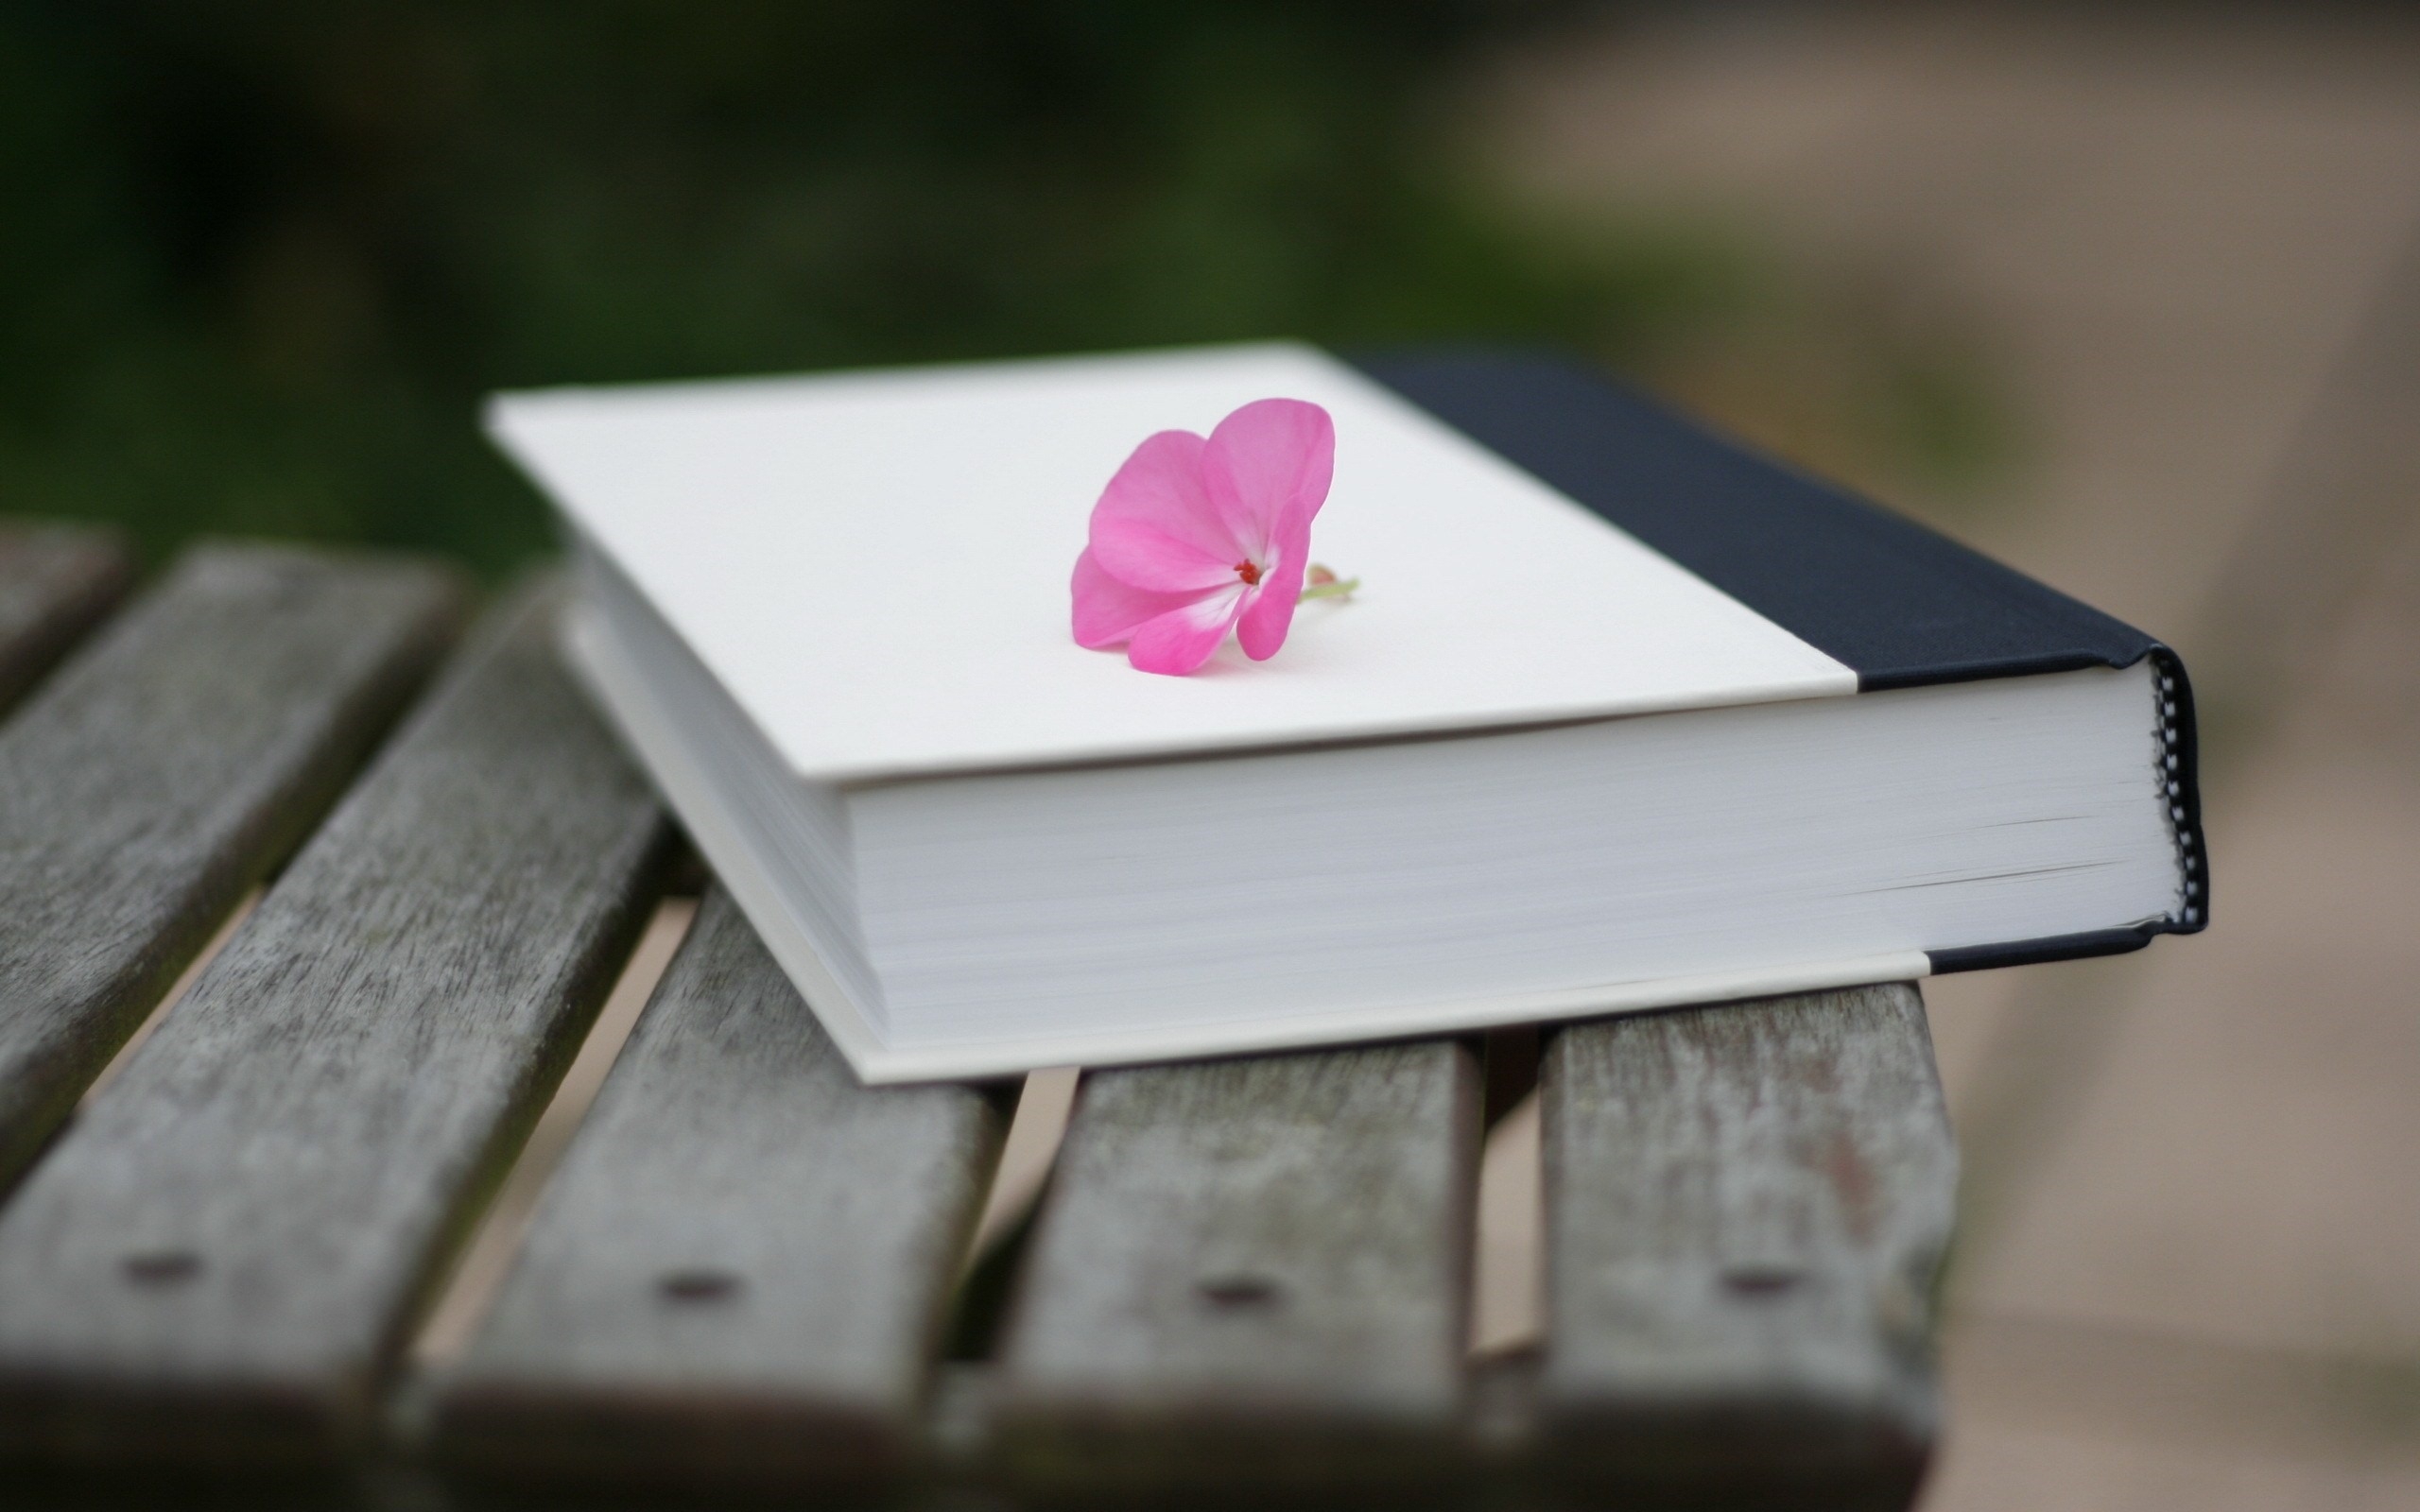 The little pink flower on the book